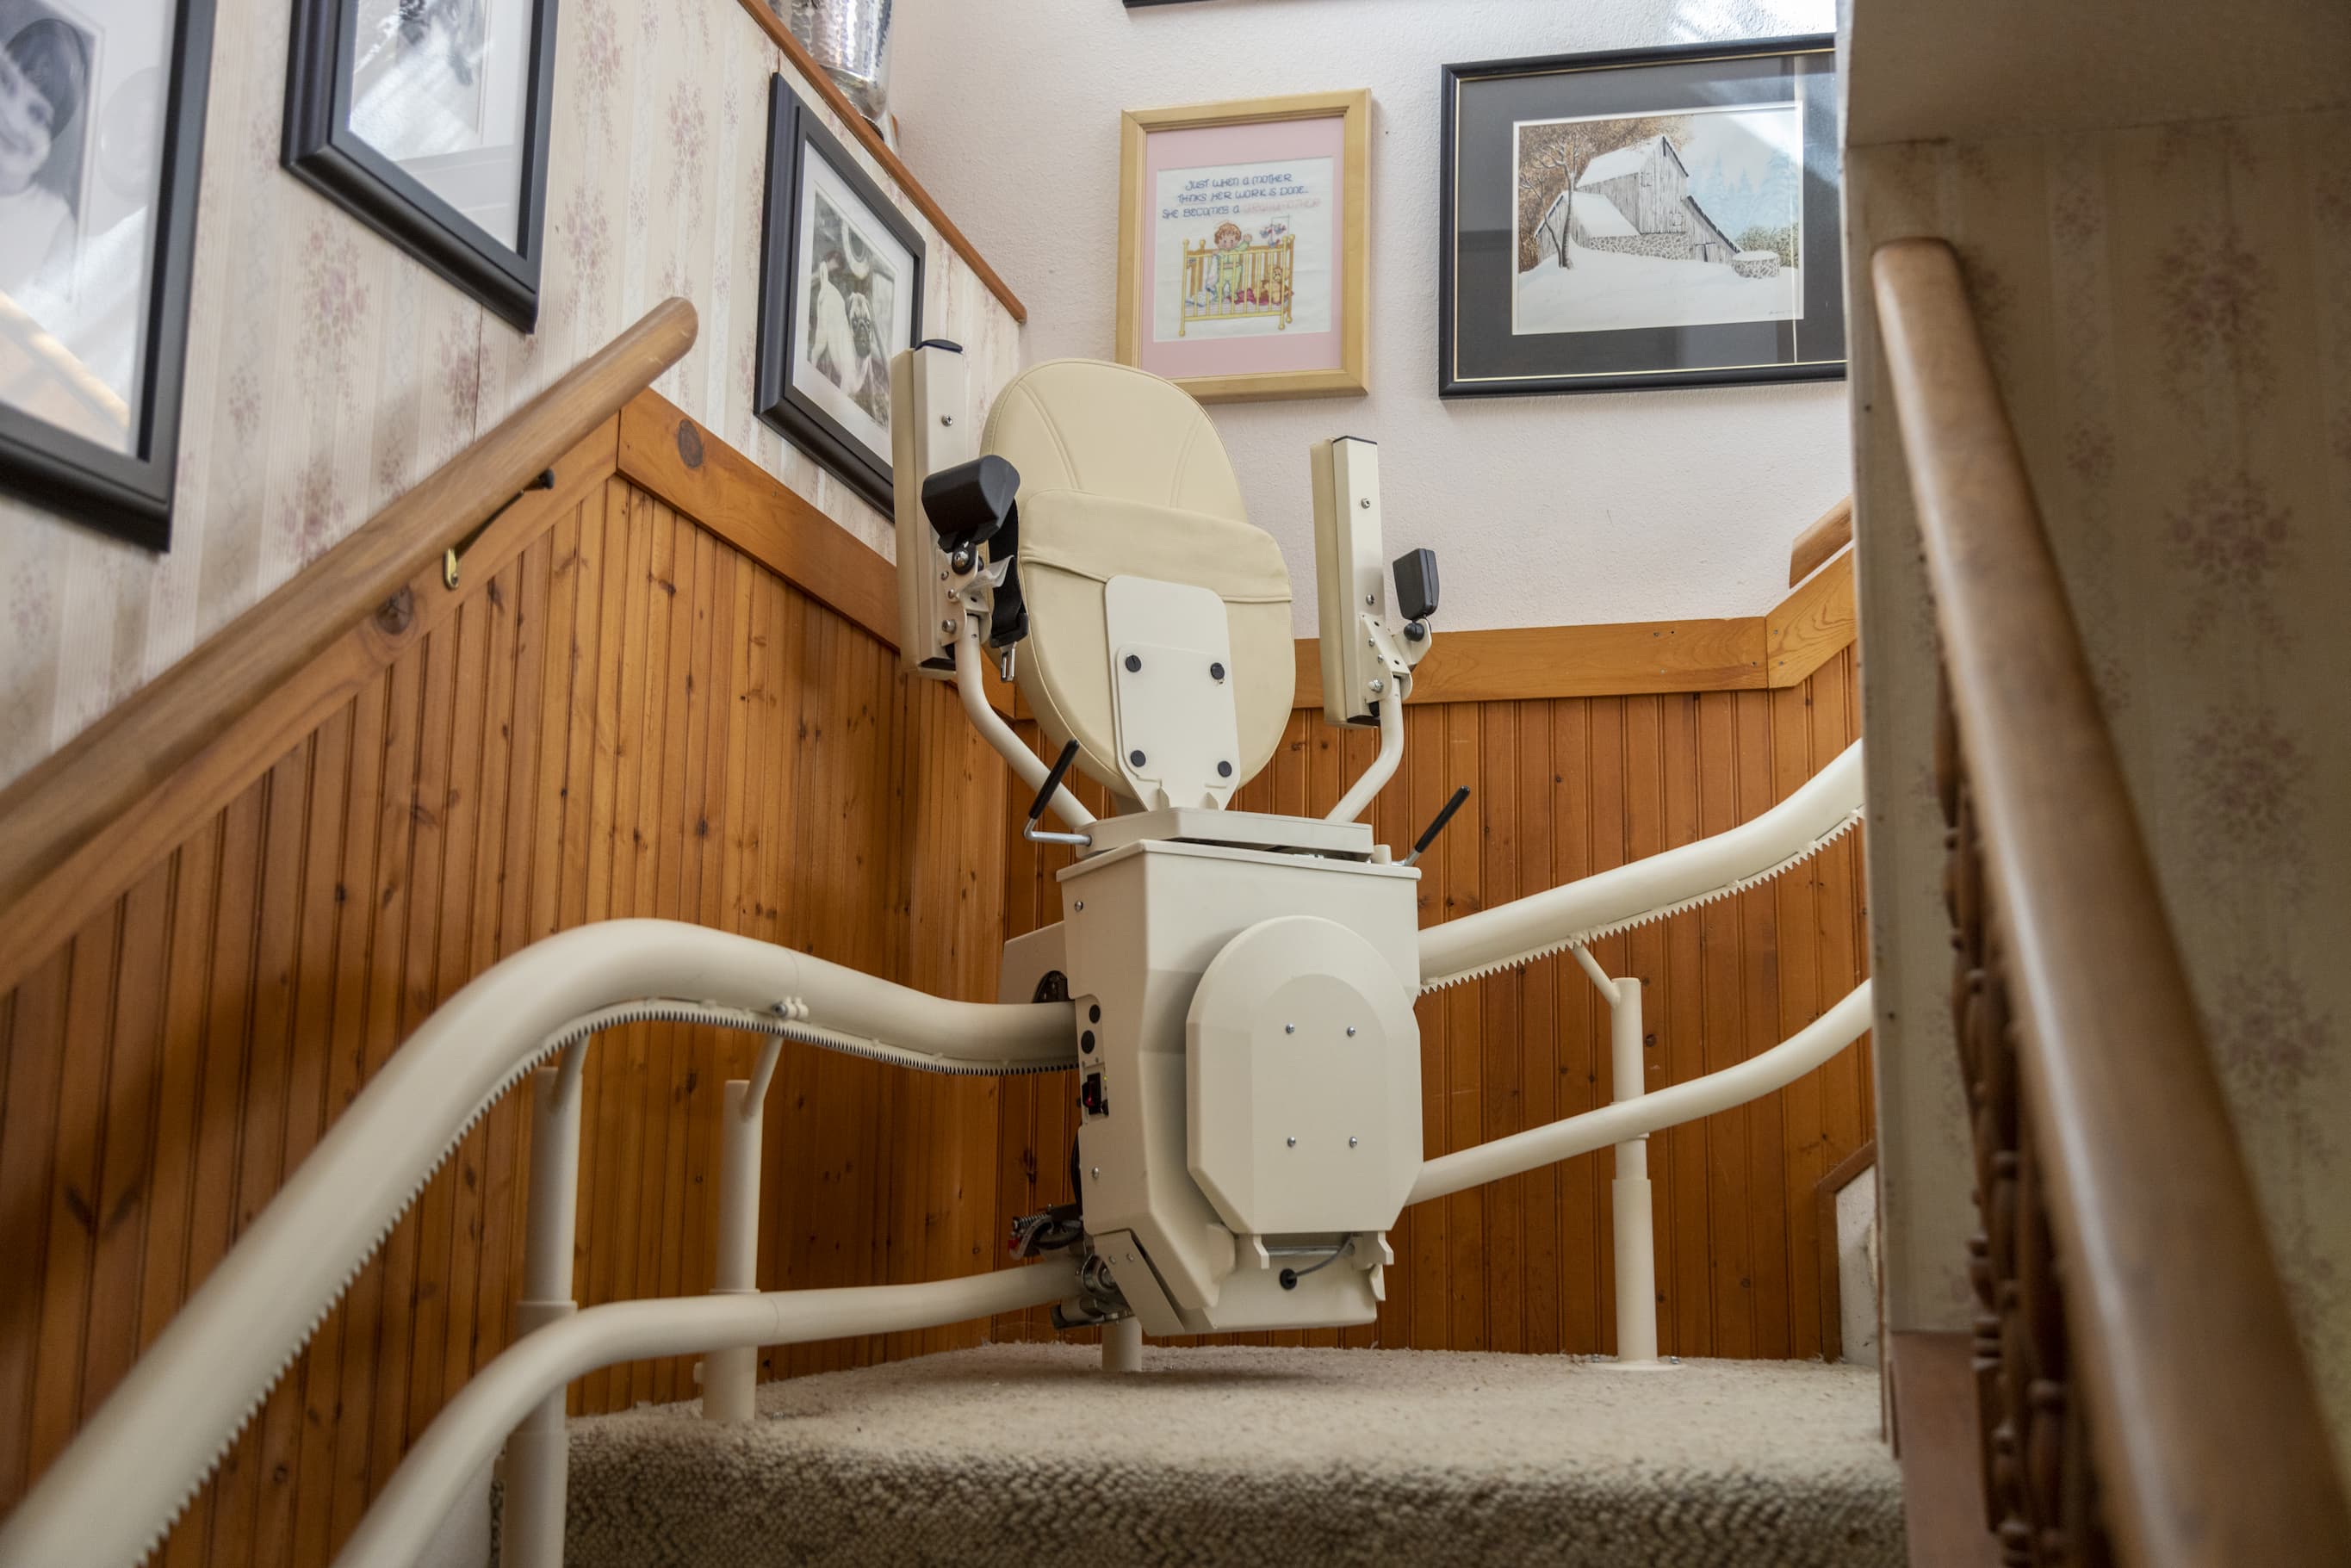 senior chair lifts for curved stairs